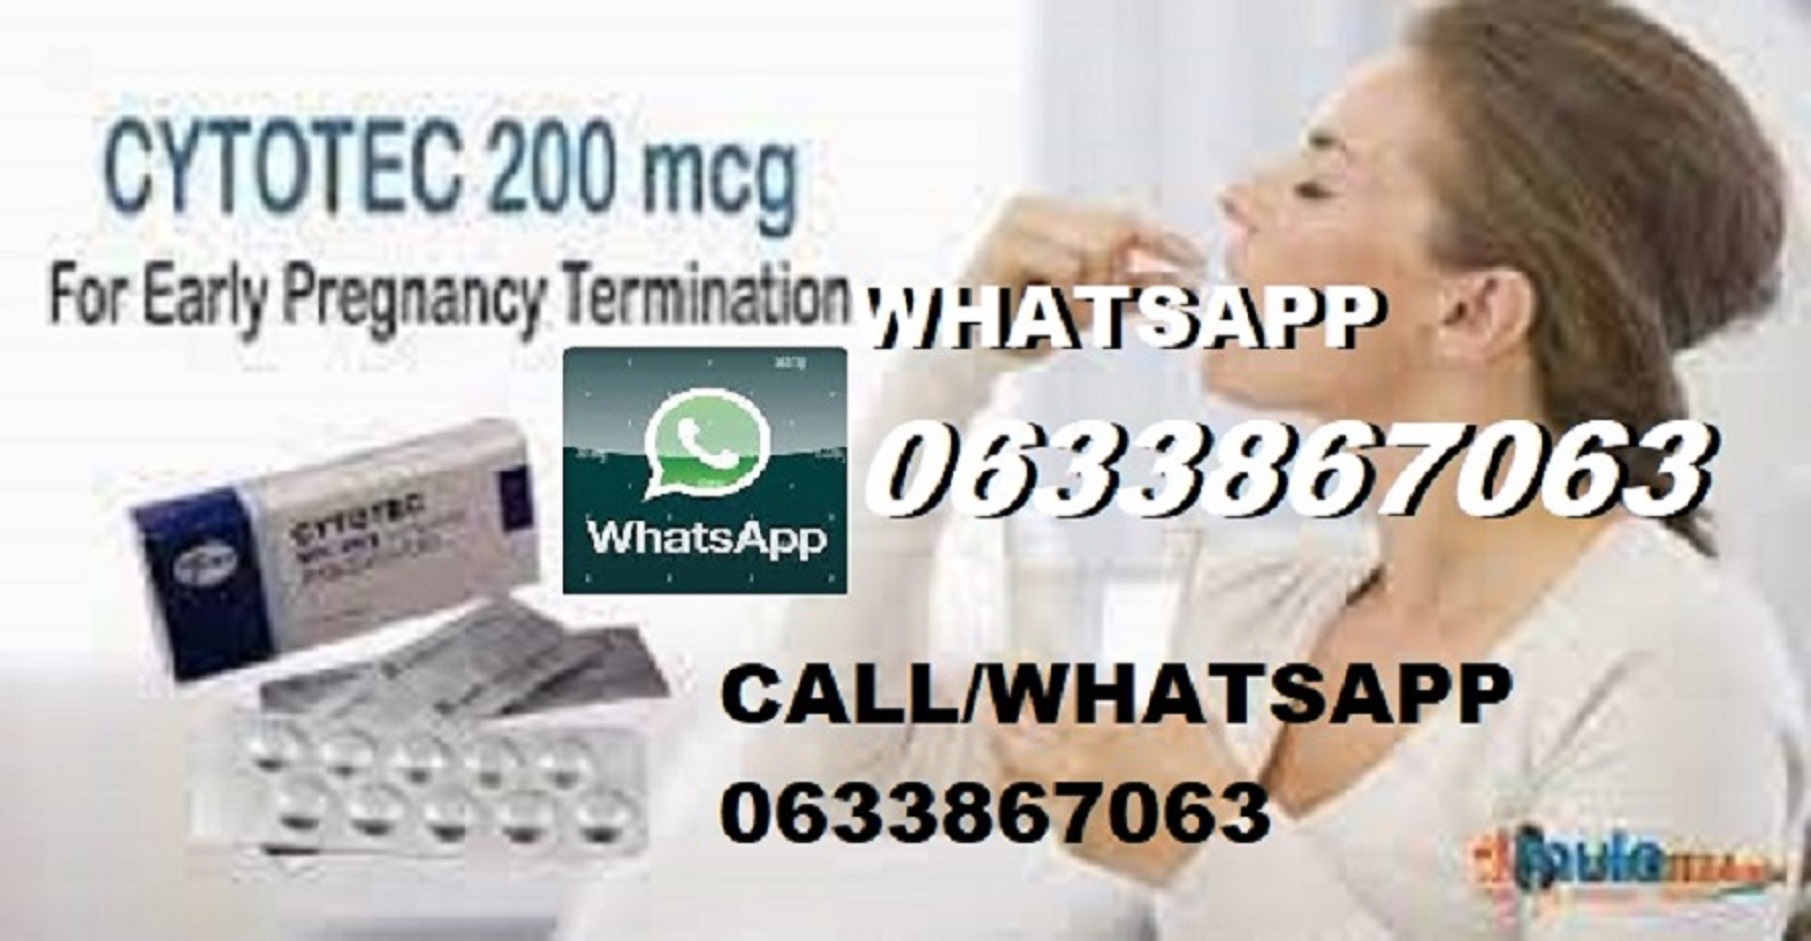 Whatsapp 0633867063 Abortion Pills For Sale In Mbombela Conc - Alaska - Anchorage ID1528915